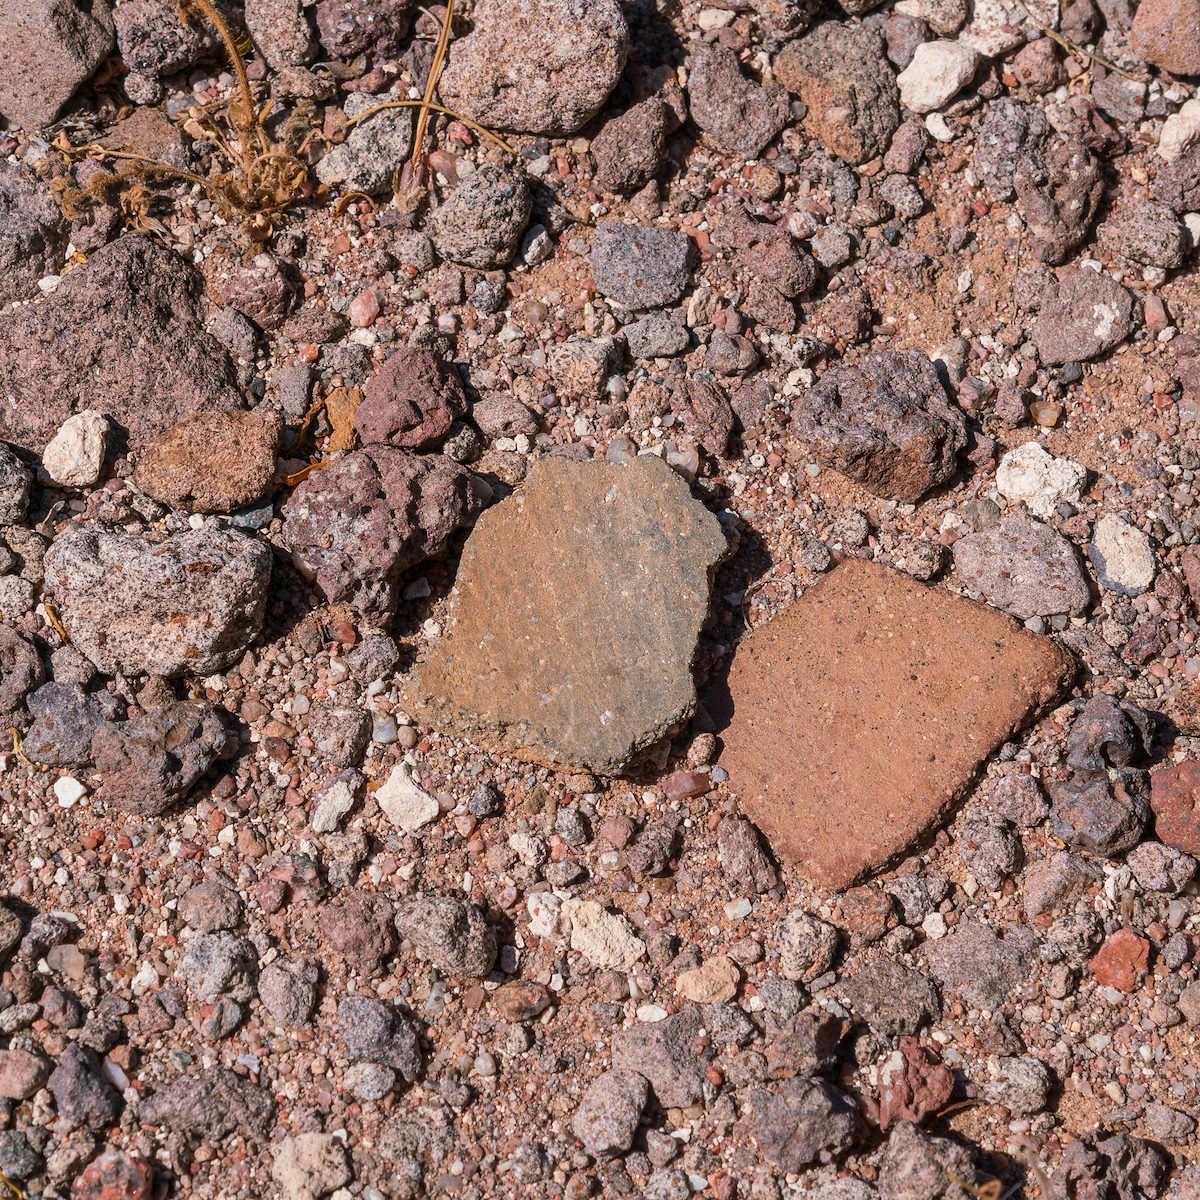 2018 May Sherds on the slopes of Cerro Prieto